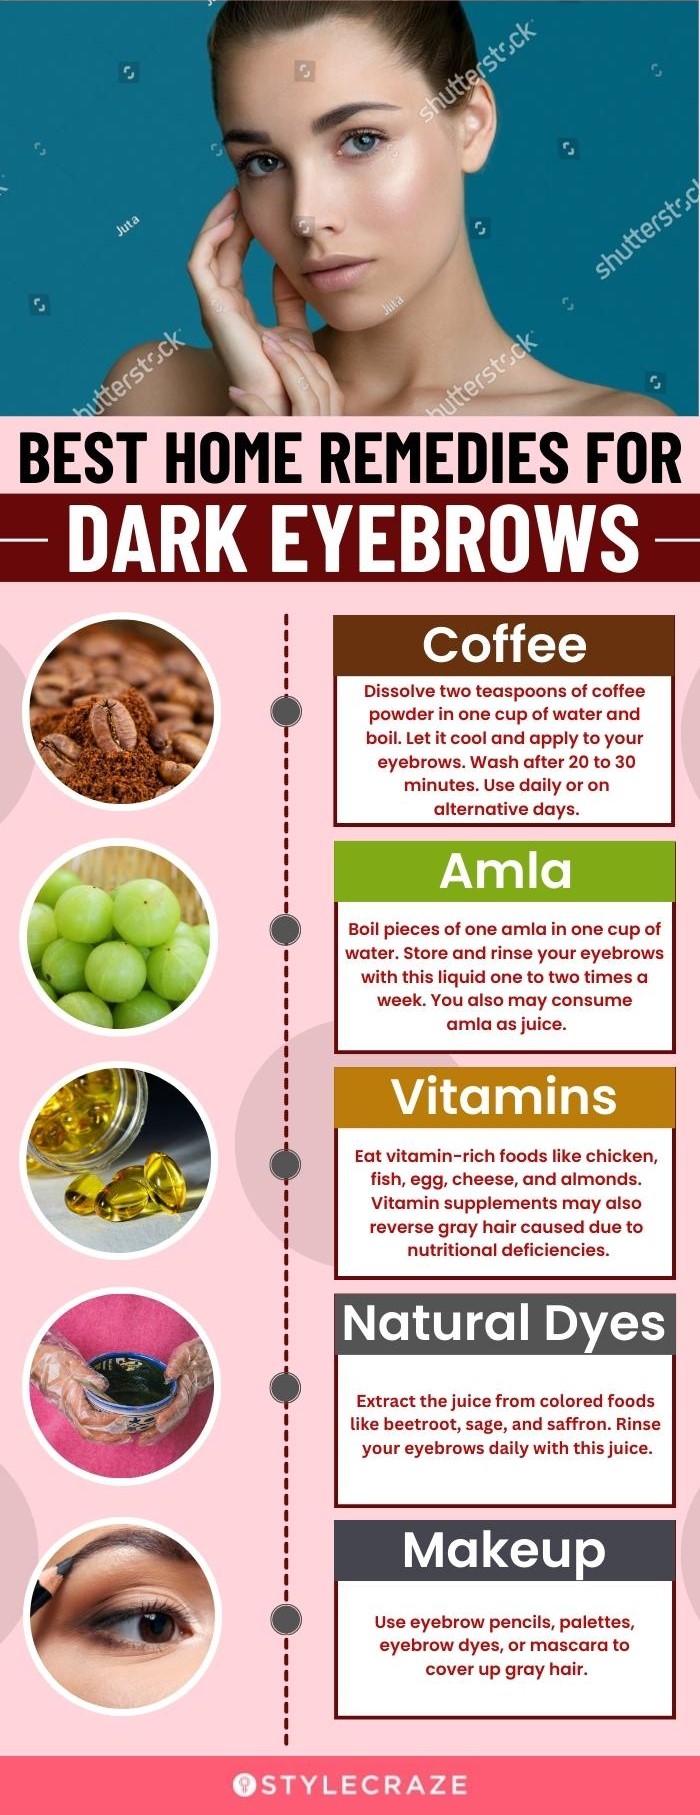 best home remedies for dark eyebrow (infographic)